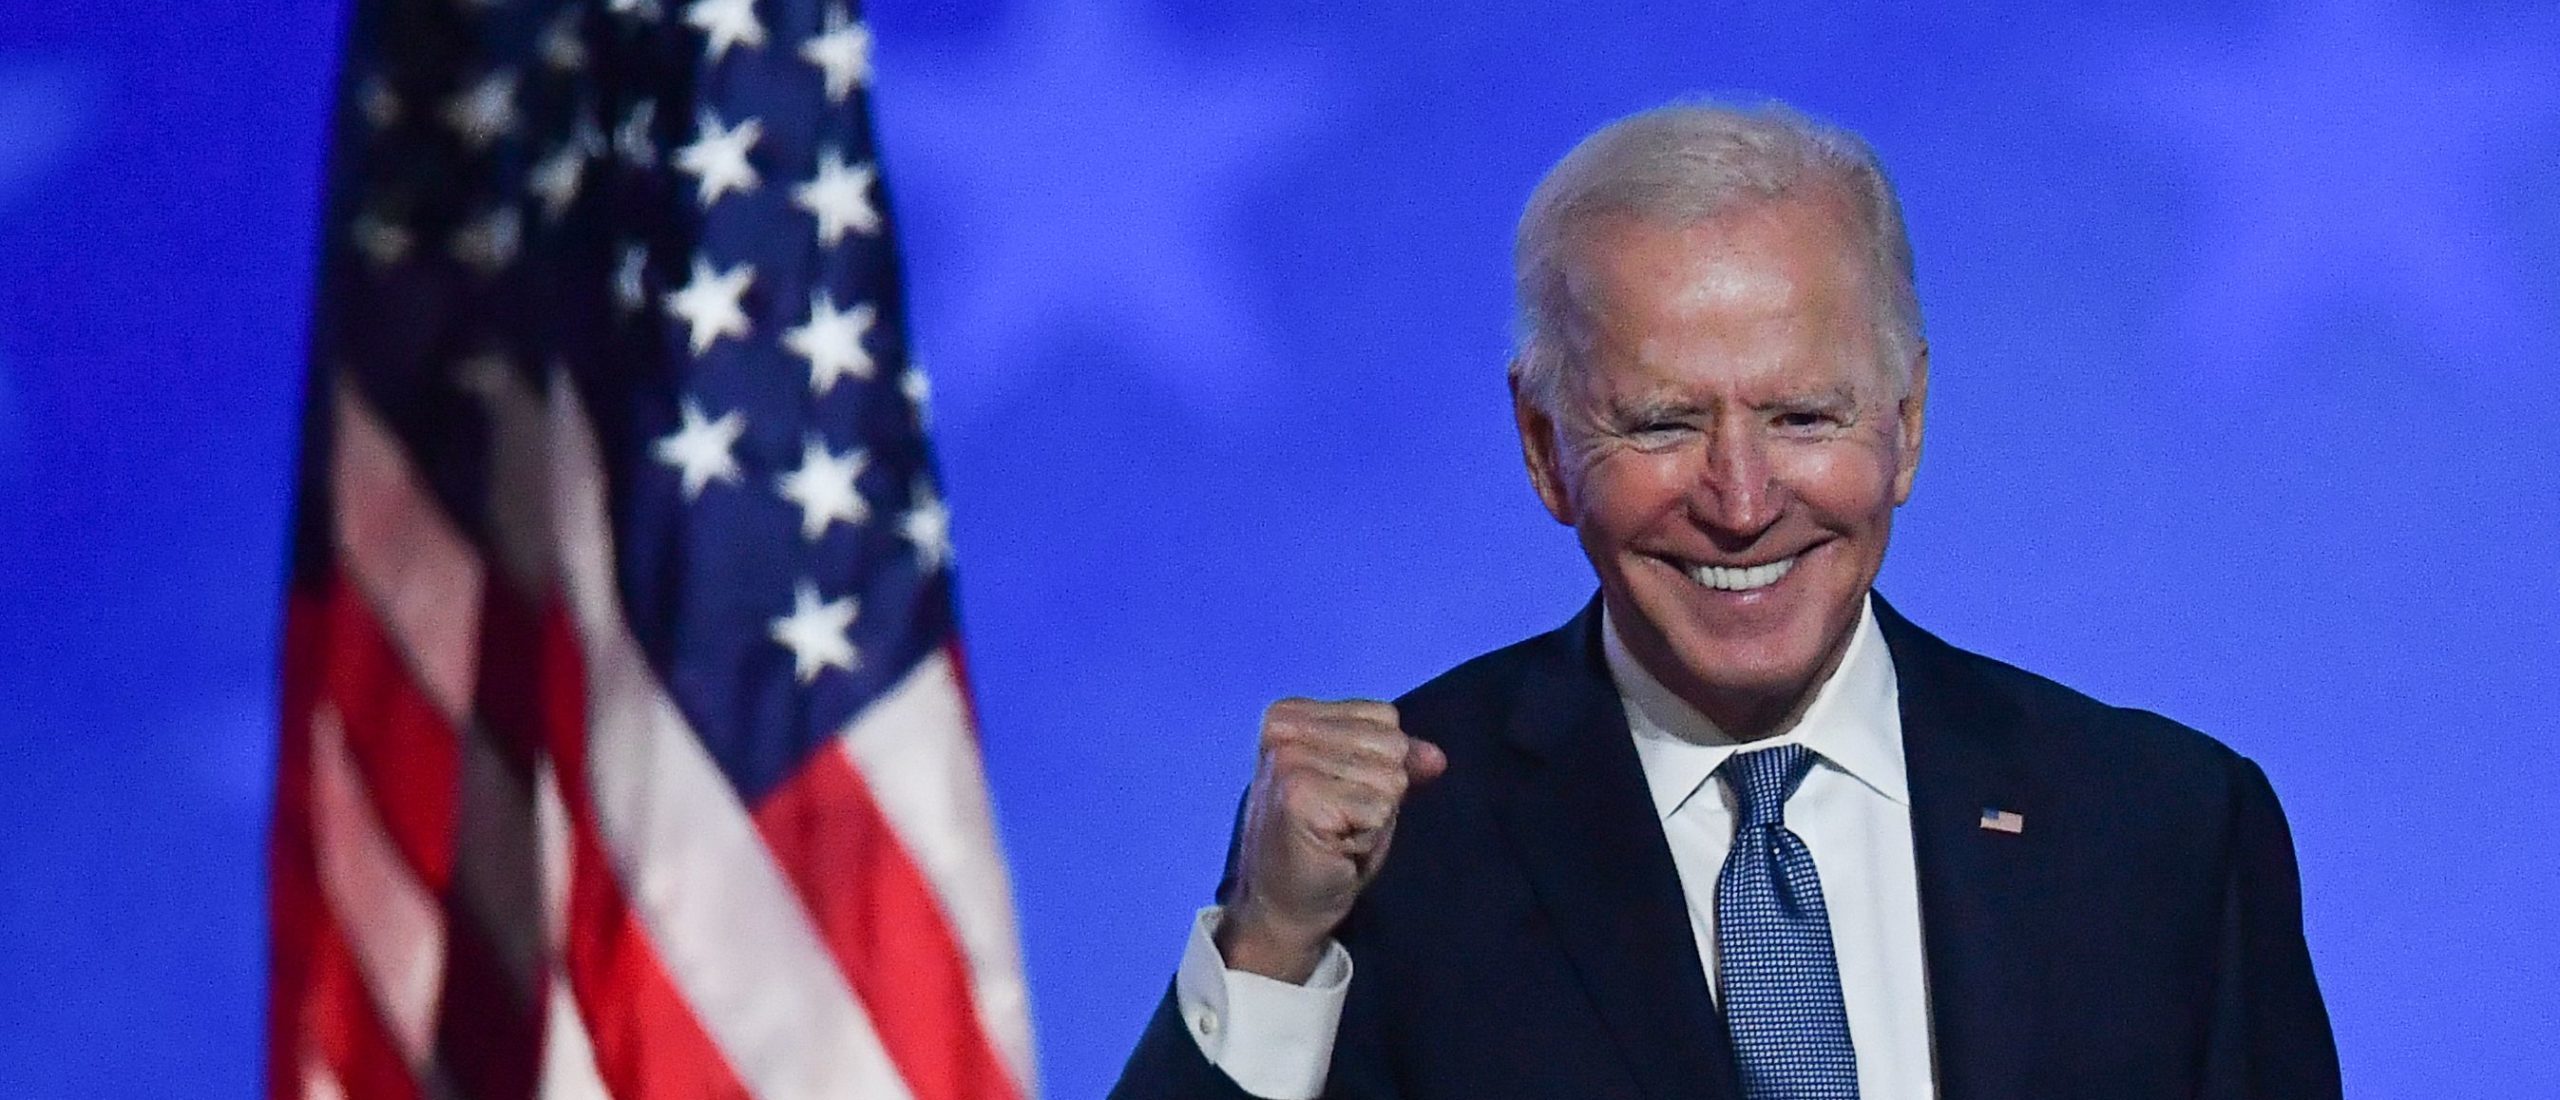 Democratic presidential nominee Joe Biden gestures after speaking during election night at the Chase Center in Wilmington, Delaware, early on November 4, 2020. - Democrat Joe Biden said early Wednesday he believes he is "on track" to defeating US President Donald Trump, and called for Americans to have patience with vote-counting as several swing states remain up in the air. "We believe we are on track to win this election," Biden told supporters in nationally broadcast remarks delivered in his home city of Wilmington, Delaware, adding: "It ain't over until every vote is counted." (Photo by Angela Weiss/AFP via Getty Images)